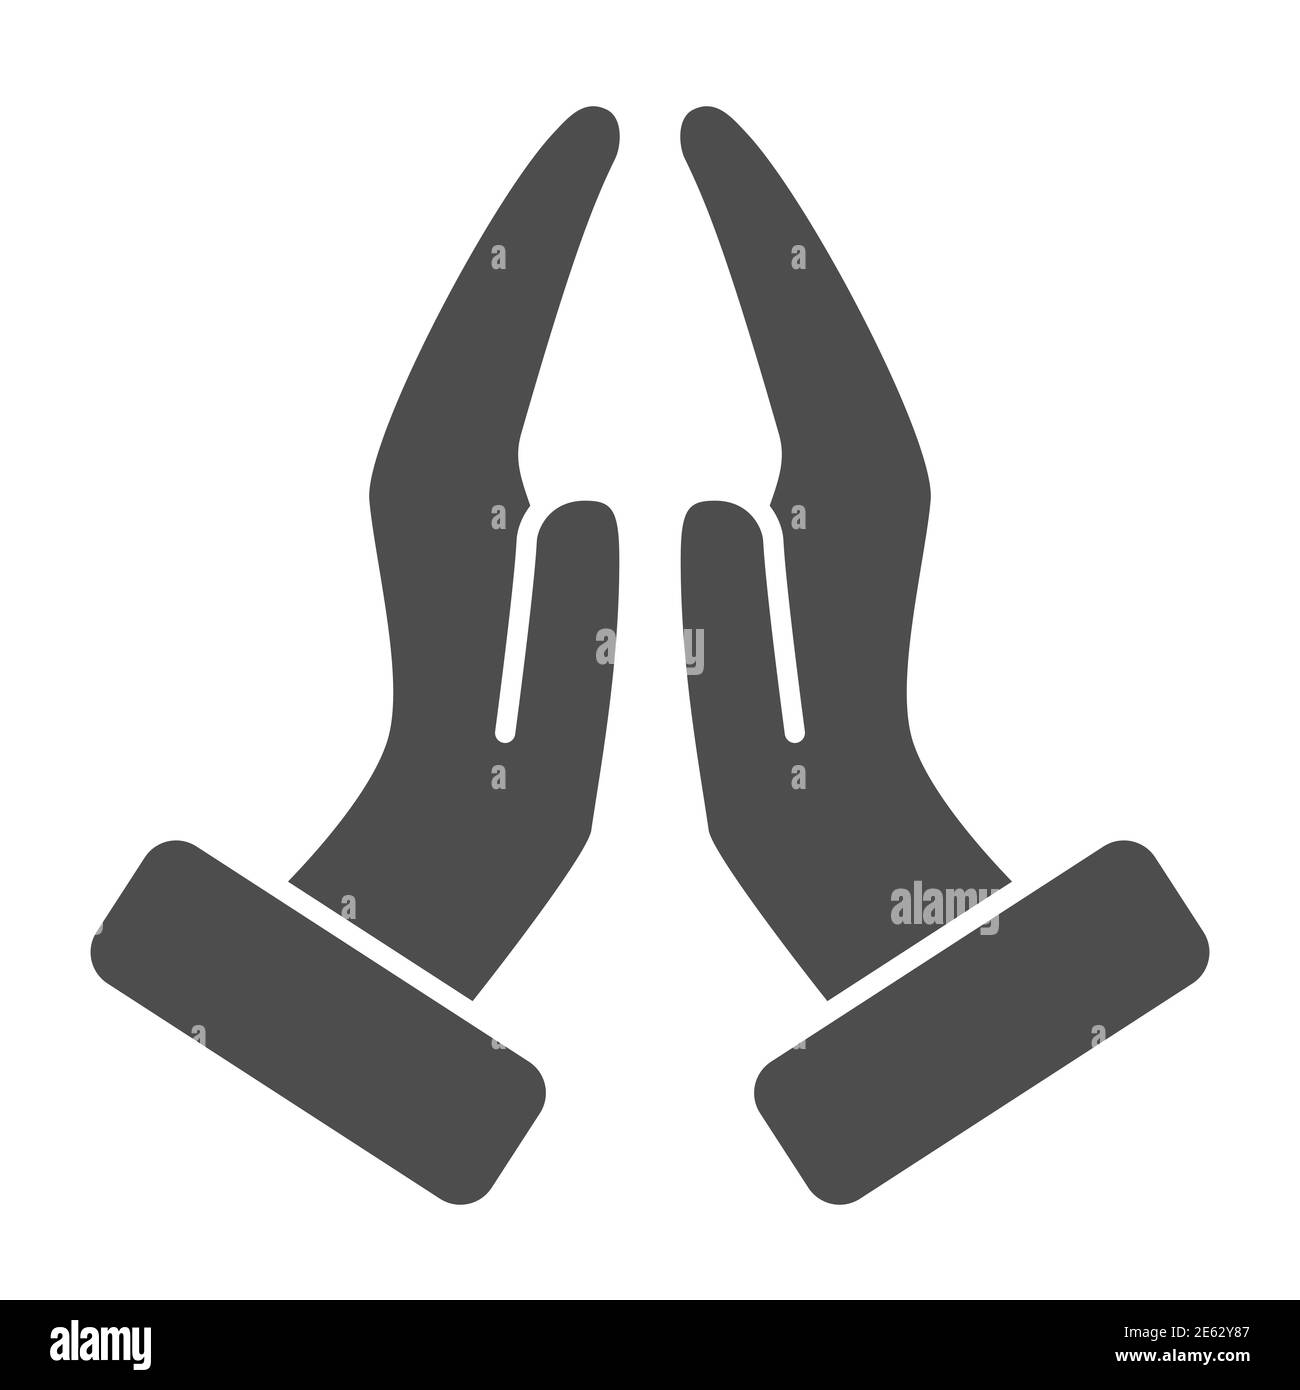 Pray hands gesture solid icon, gestures concept, hands together in religious prayer sign on white background, Hand beg icon in glyph style for mobile Stock Vector